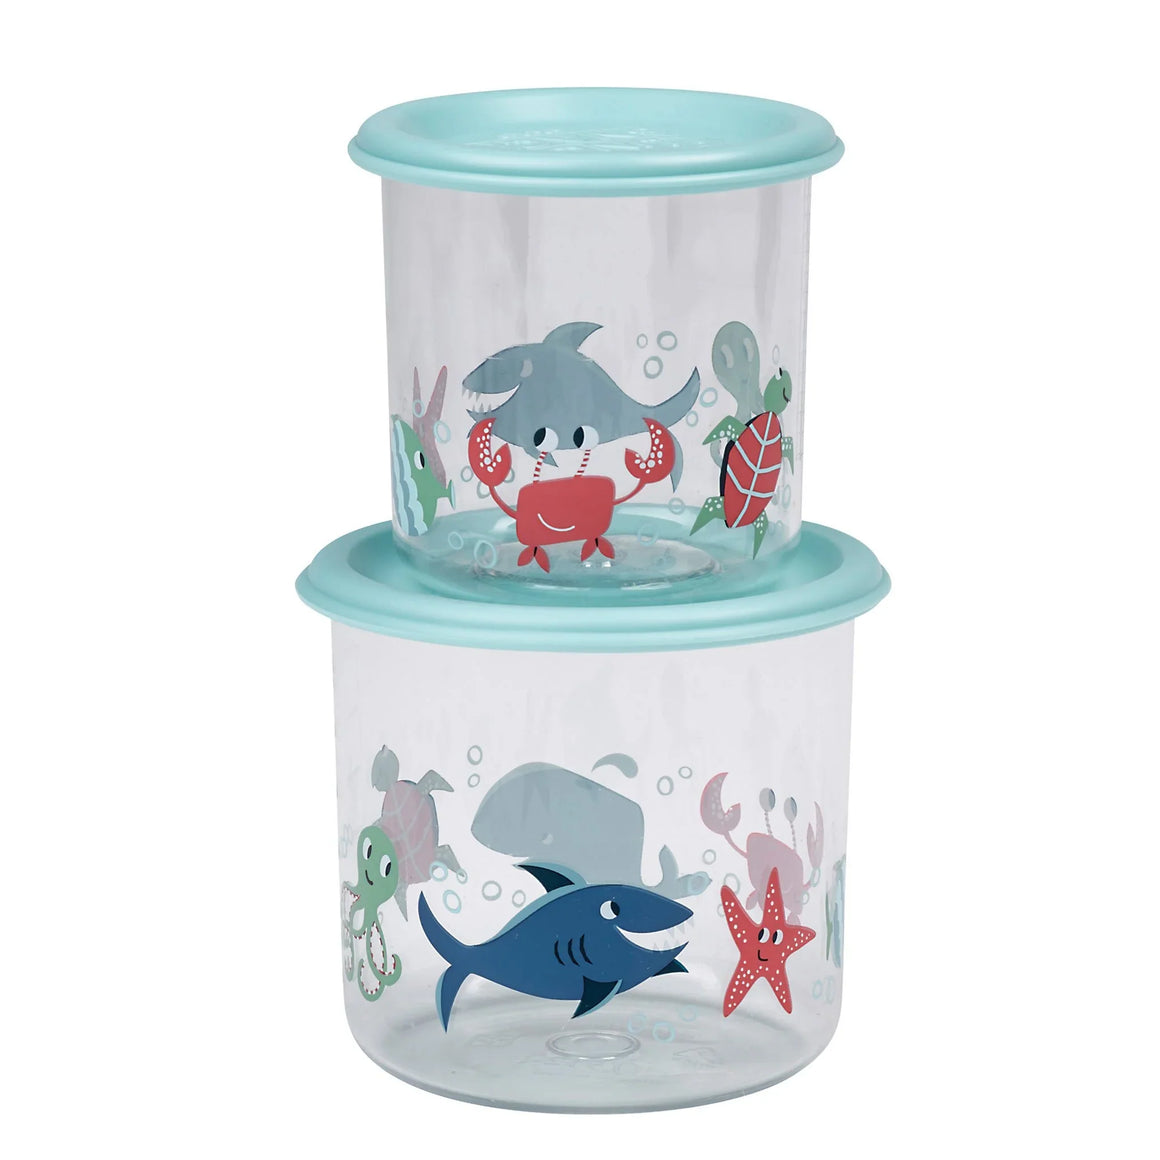 Ocean - Good Lunch Containers - Large 2 pcs.